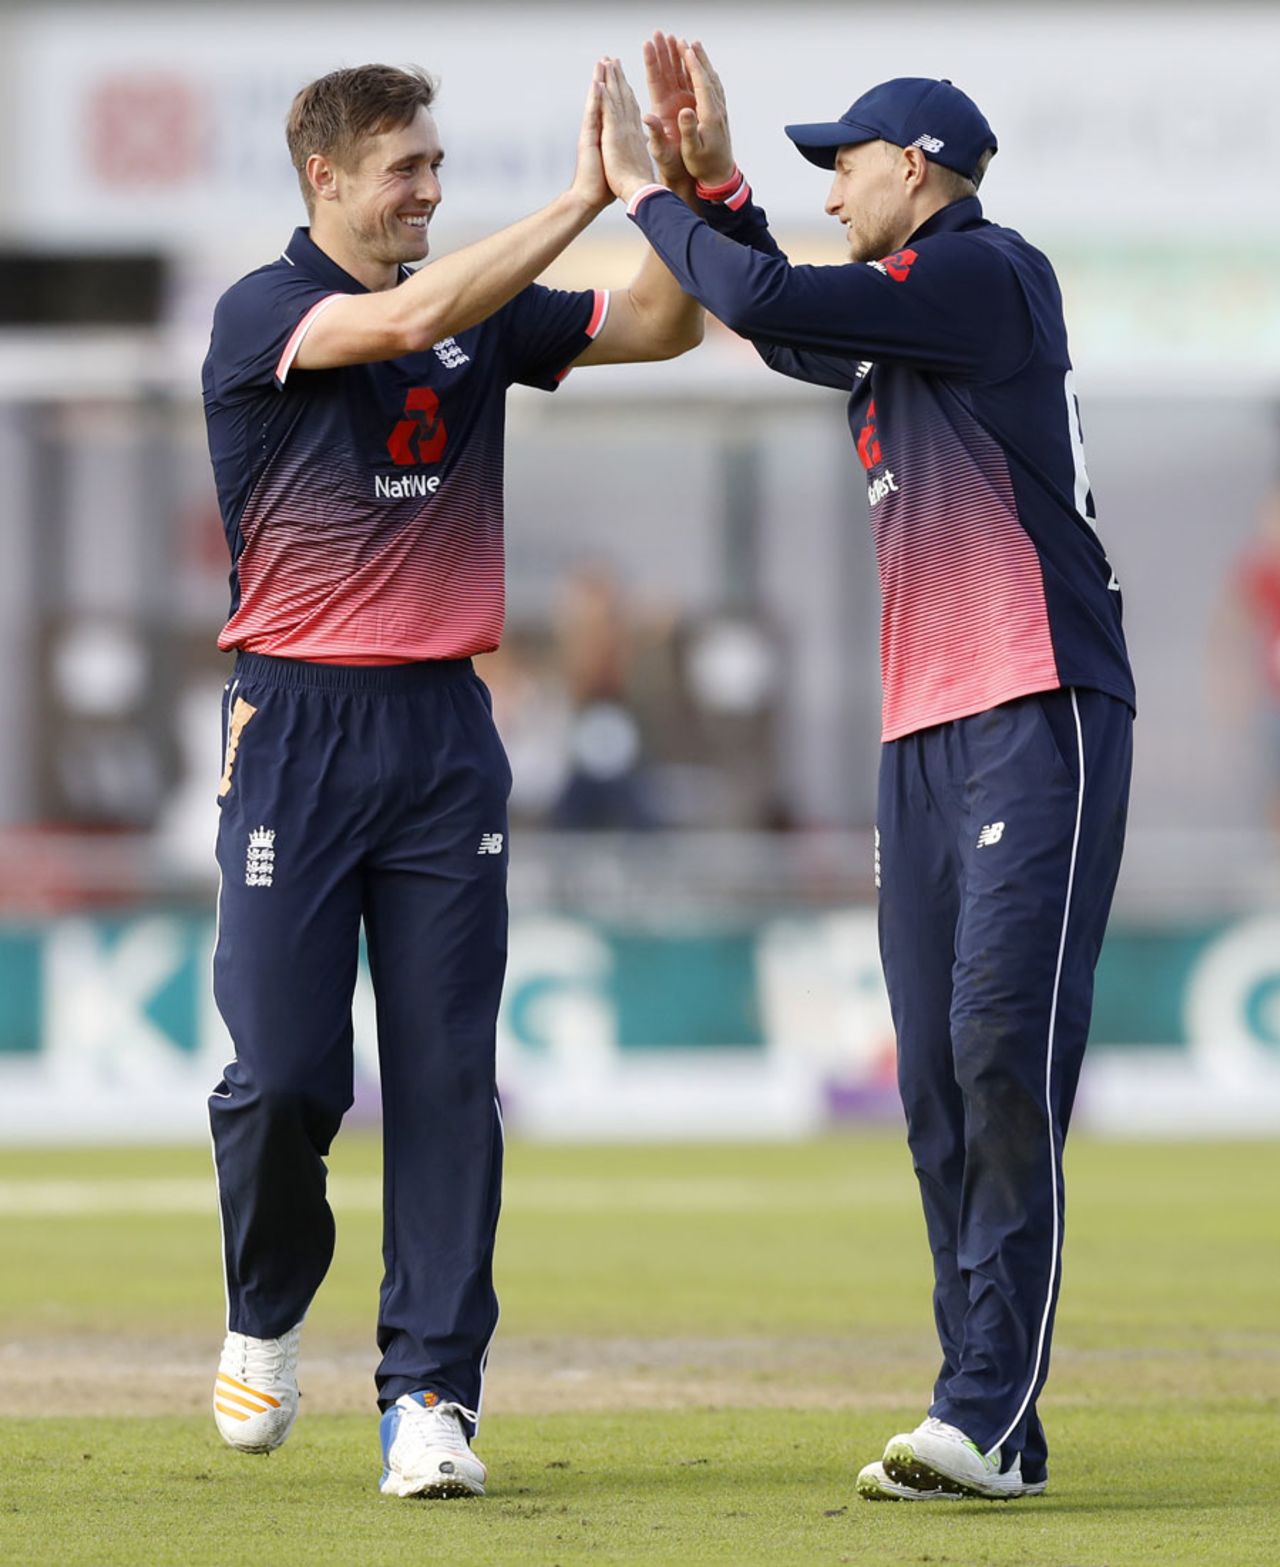 Chris Woakes gets a high five from Joe Root, England v West Indies, 1st ODI, Old Trafford, September 19, 2017